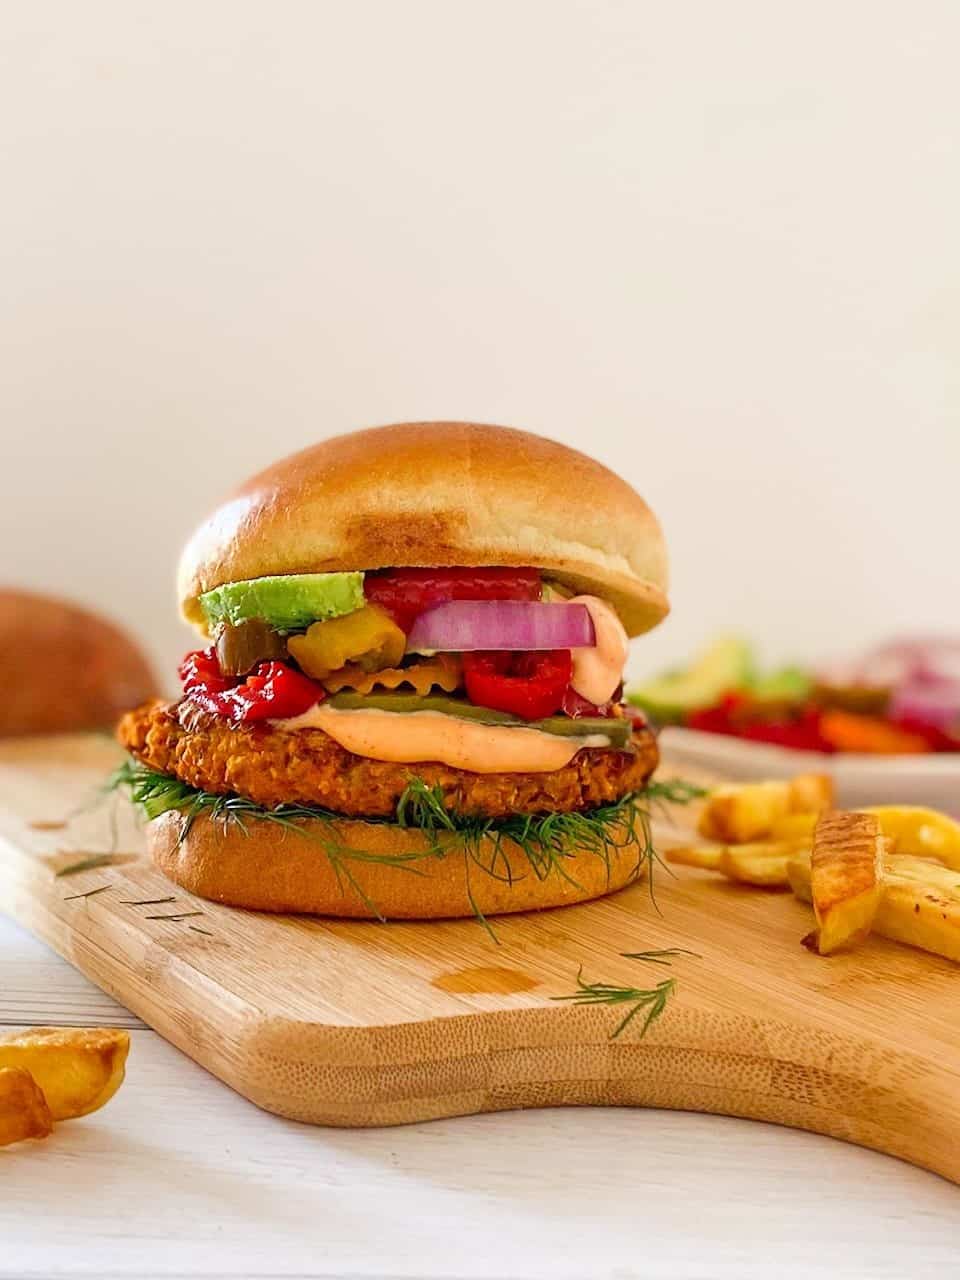 Sweet potato burger in bun with dill, hot peppers, onion and avocado inside.